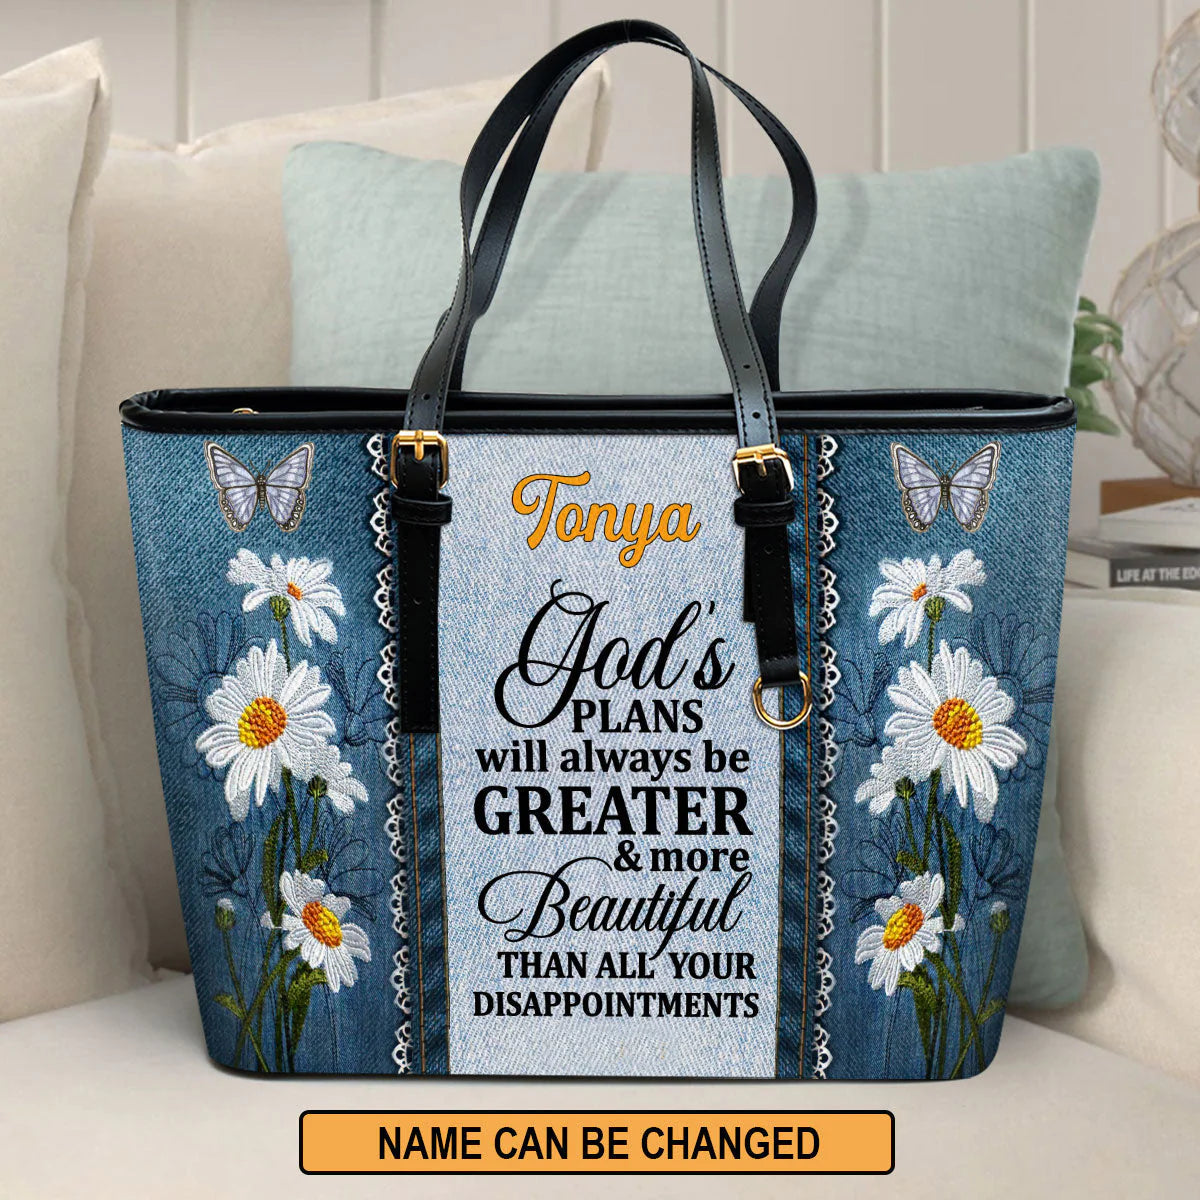 Christianart Handbag, God's Plans Will Always Be Greater Than All Your Disappointments Daisy & Butterfly, Personalized Gifts, Gifts for Women, Christmas Gift. - Christian Art Bag